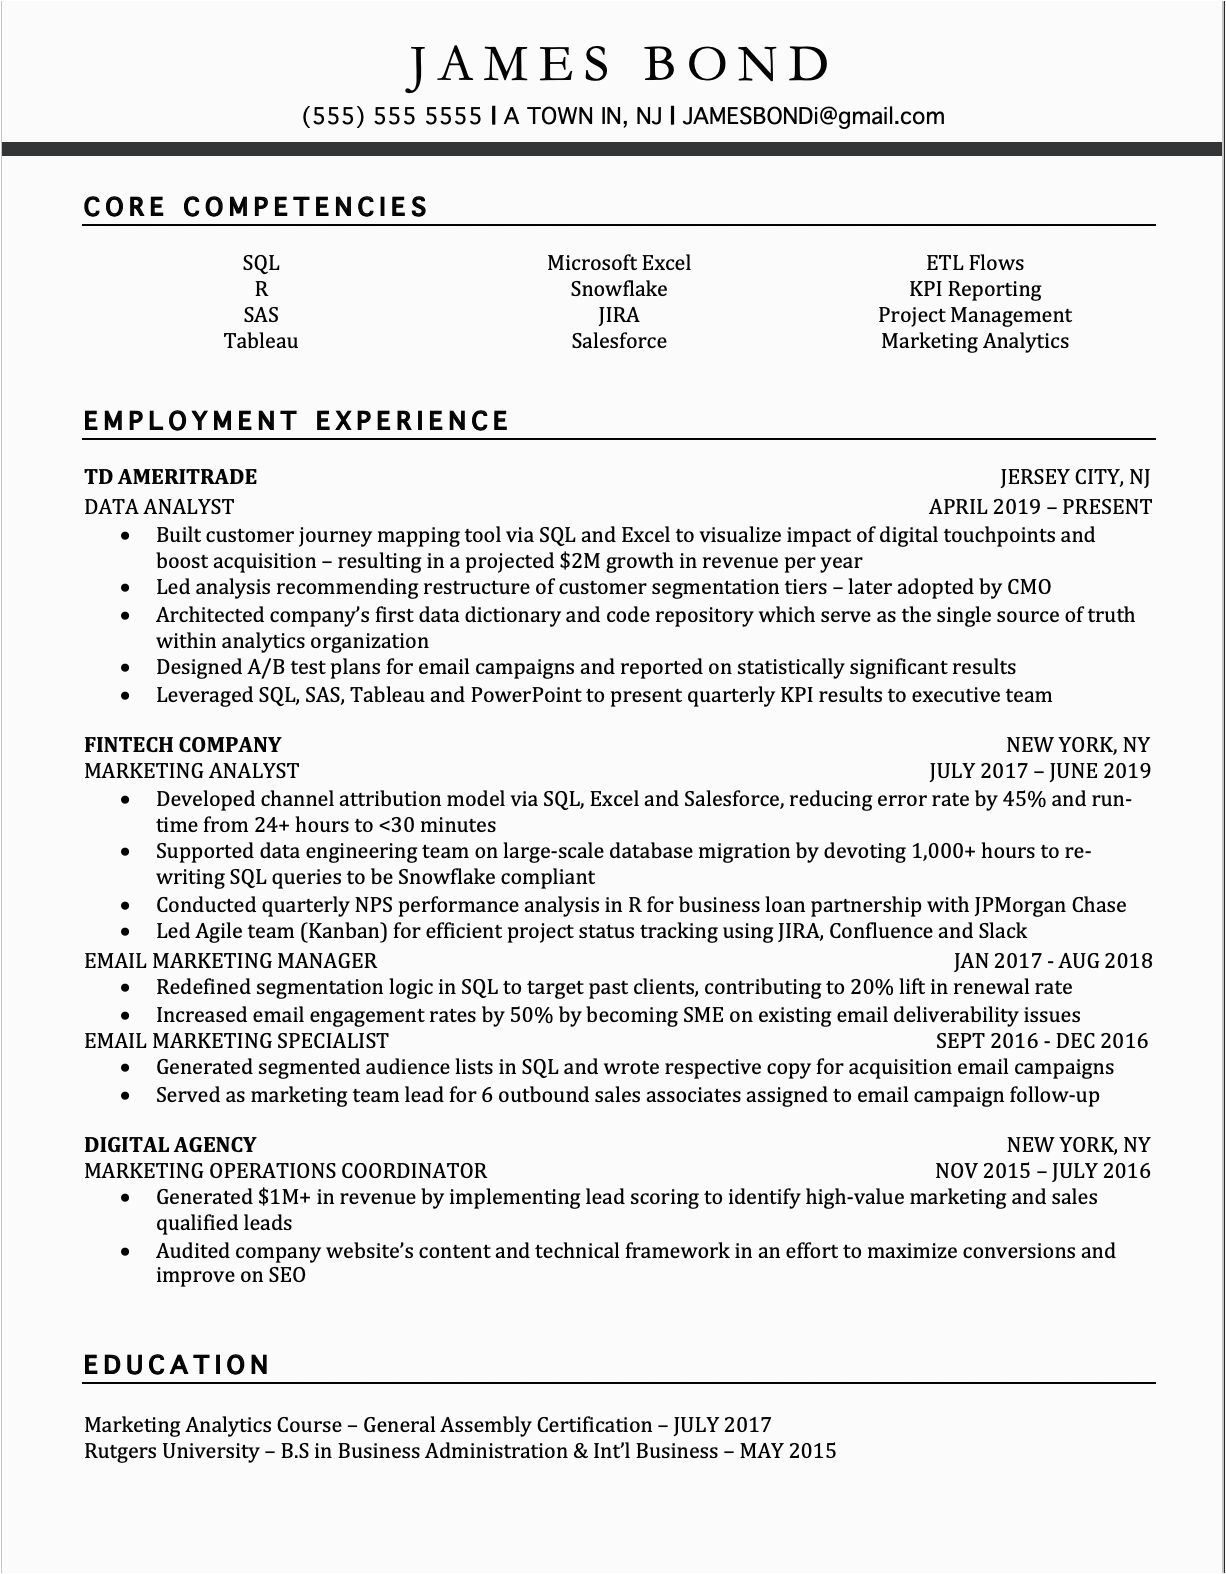 Sample Resume Multiple Jobs Same Company Resume format Multiple Positions In Same Pany